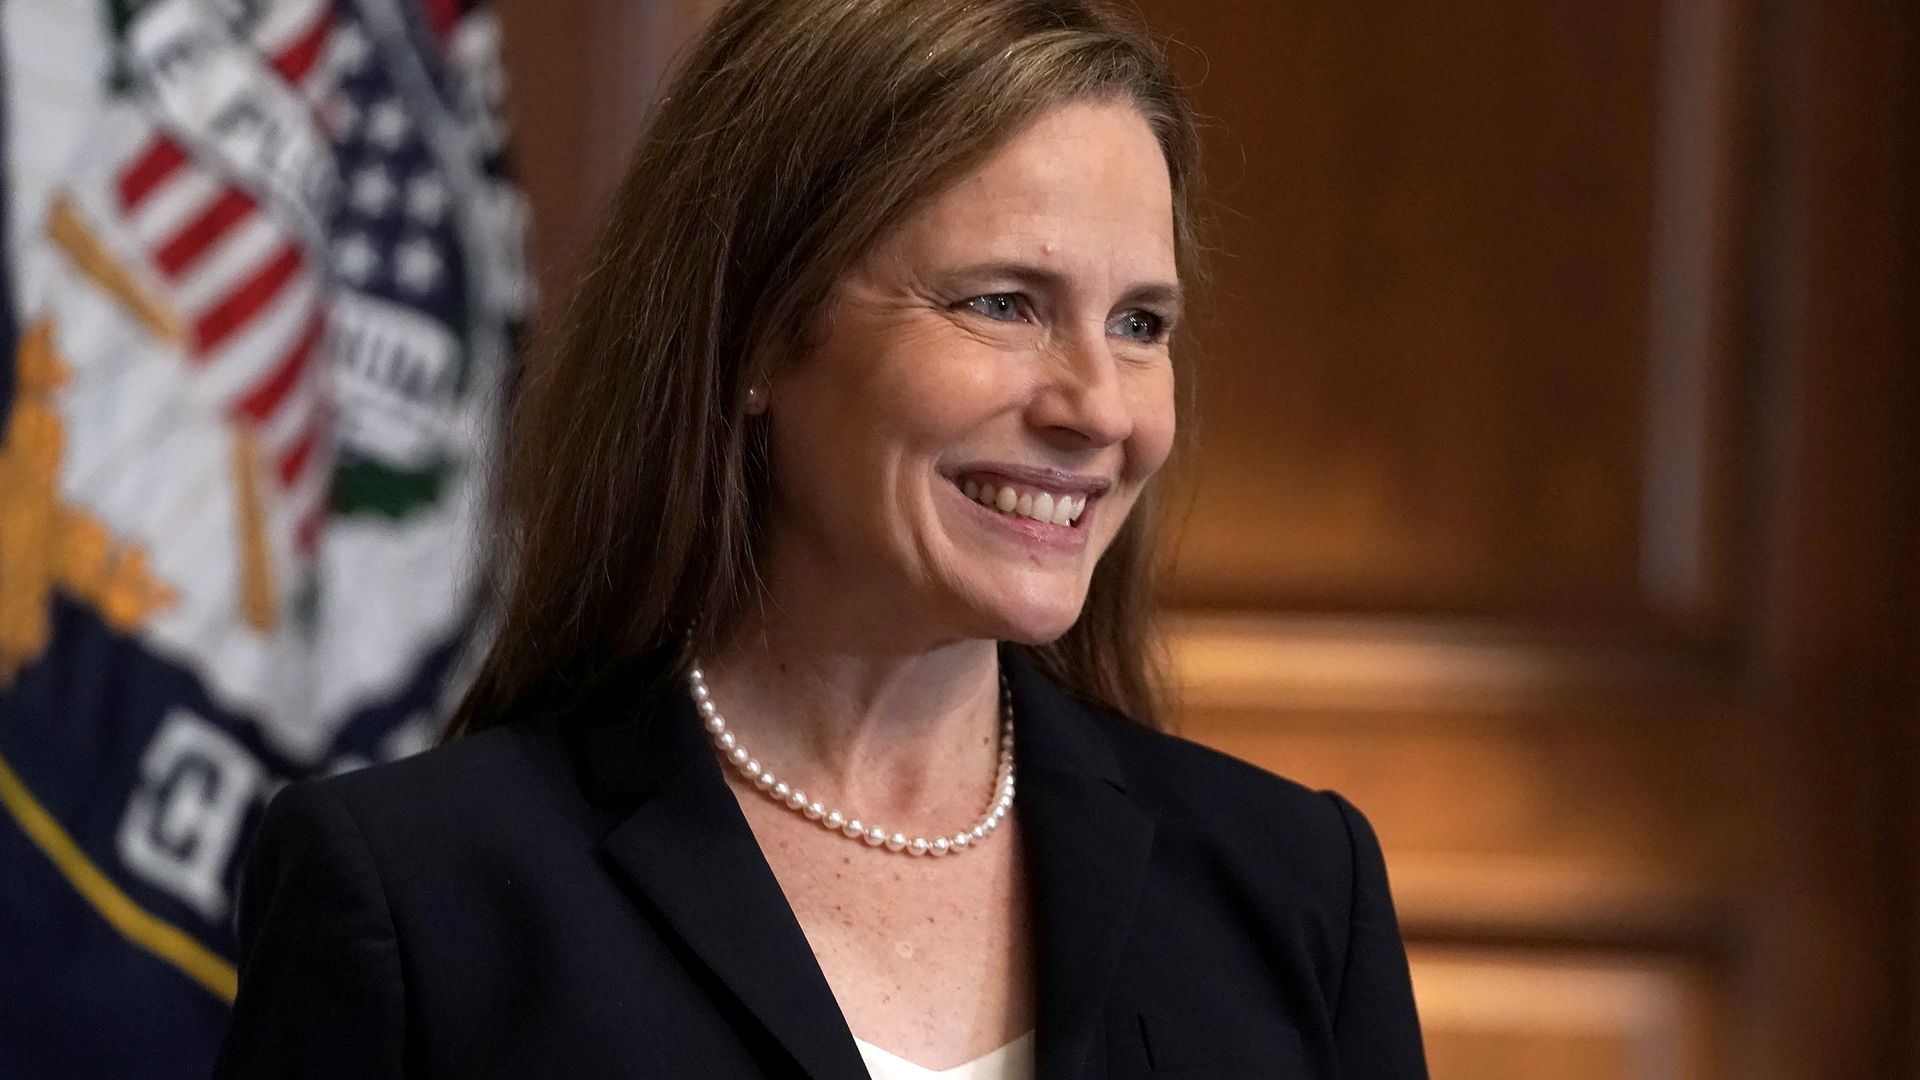 Supreme Court Justice Amy Coney Barrett said it would be a good idea for the high court to adopt its own code of ethics.